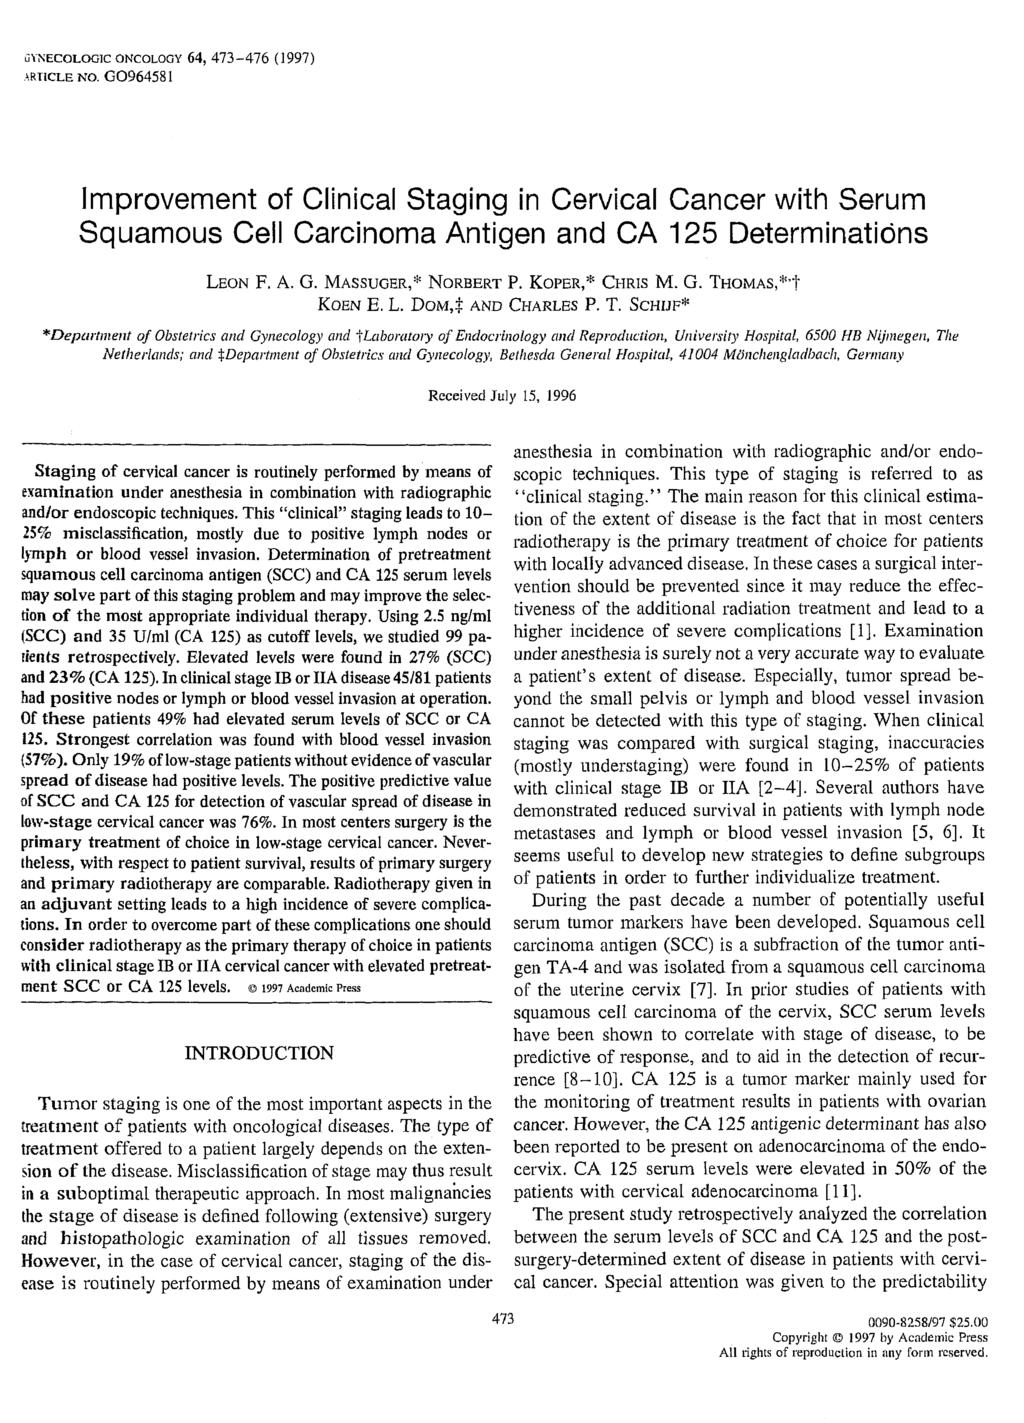 GYECOLOGIC OCOLOGY 64, 473-476 (1997) ARTICLE O. G0964581 Improvement of Clinical Staging in Cervical Cancer with Serum Squamous Cell Carcinoma Antigen and CA 125 Determinations L e o n F. A. G. M a s su g e r,* o r b e r t P.